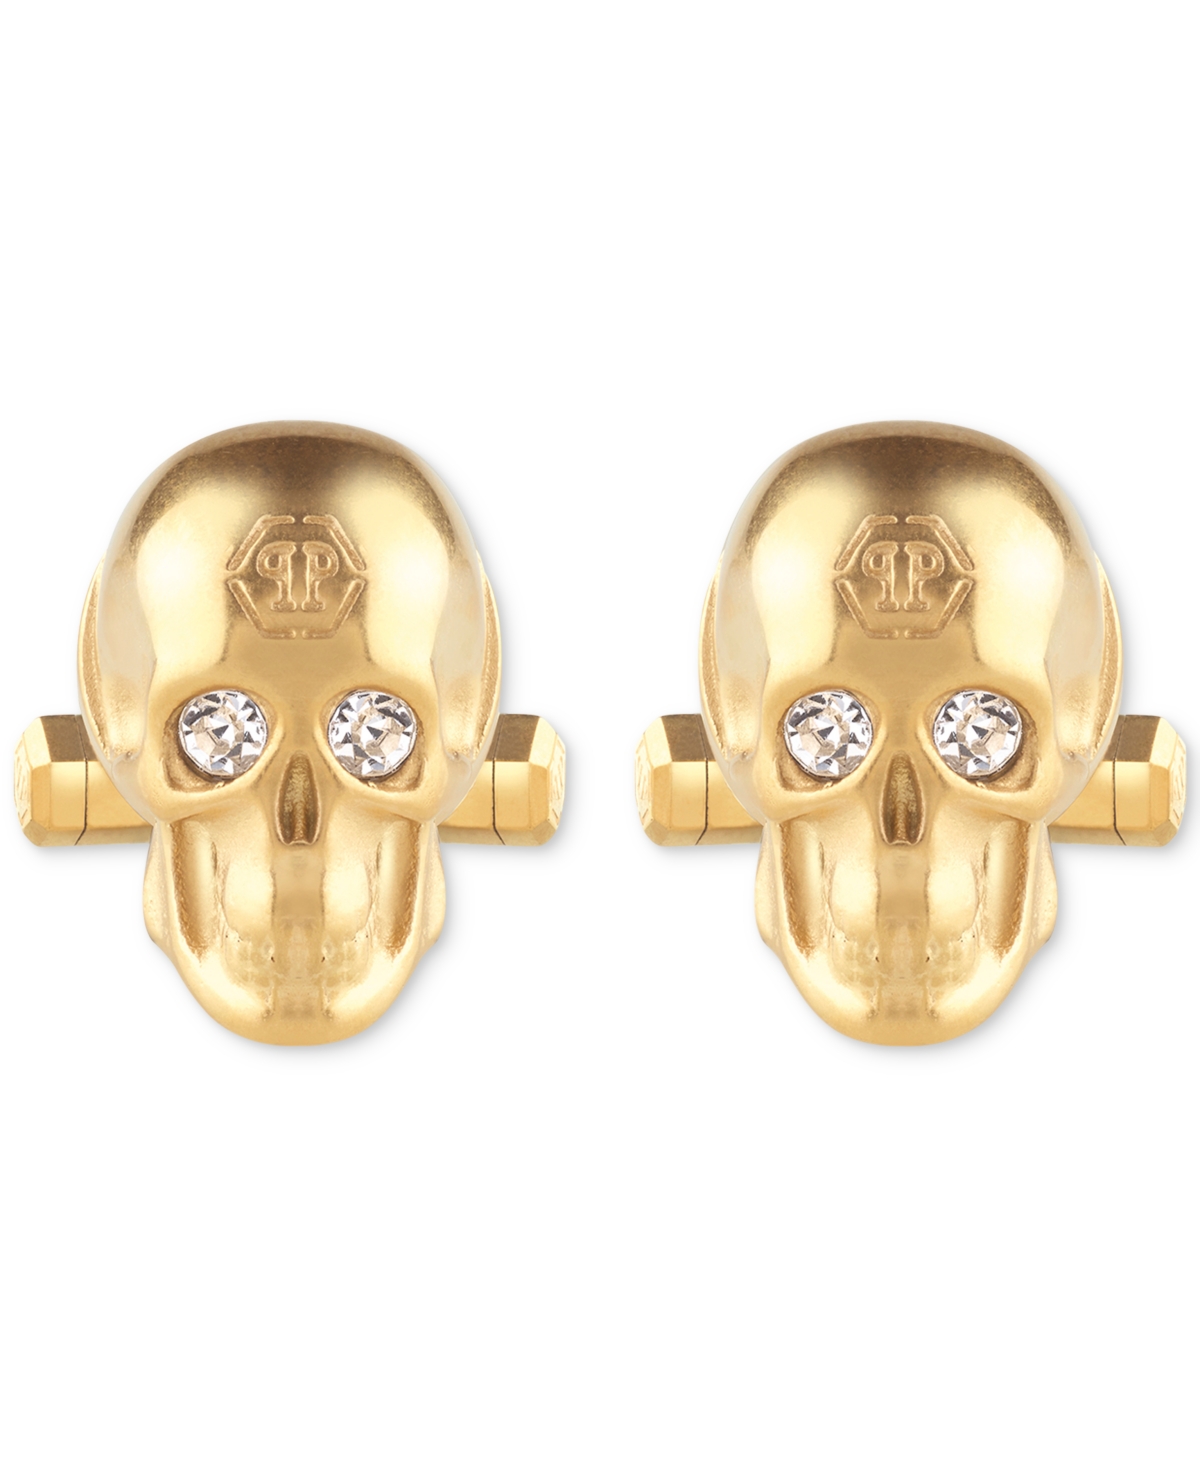 Gold-Tone Ip Stainless Steel 3D $kull Cuff Links - Ip Yellow Gold